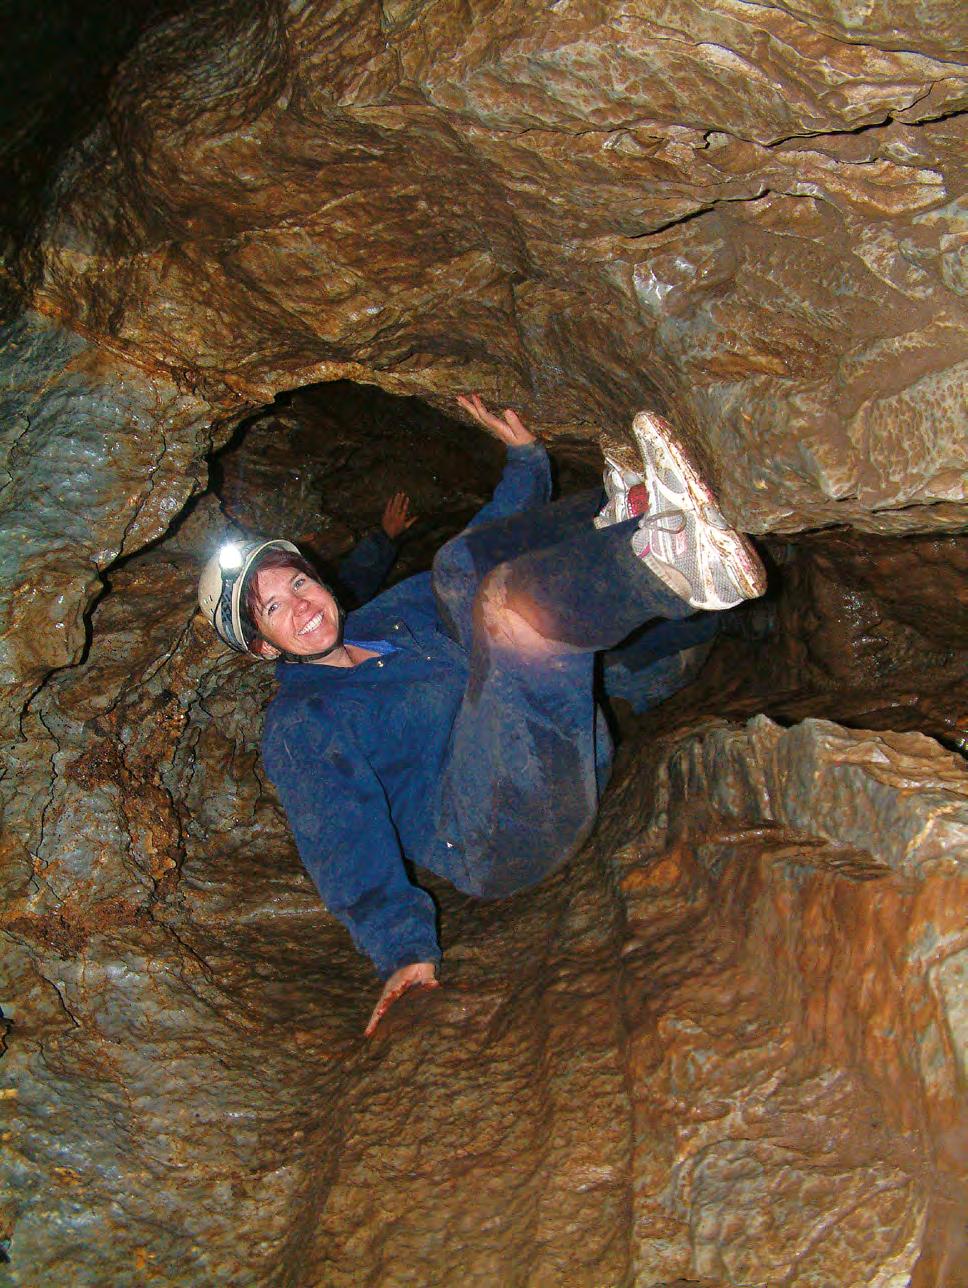 Adventure Caving is one of Australia s best adventure experiences great for both body and mind for those who want something completely different.